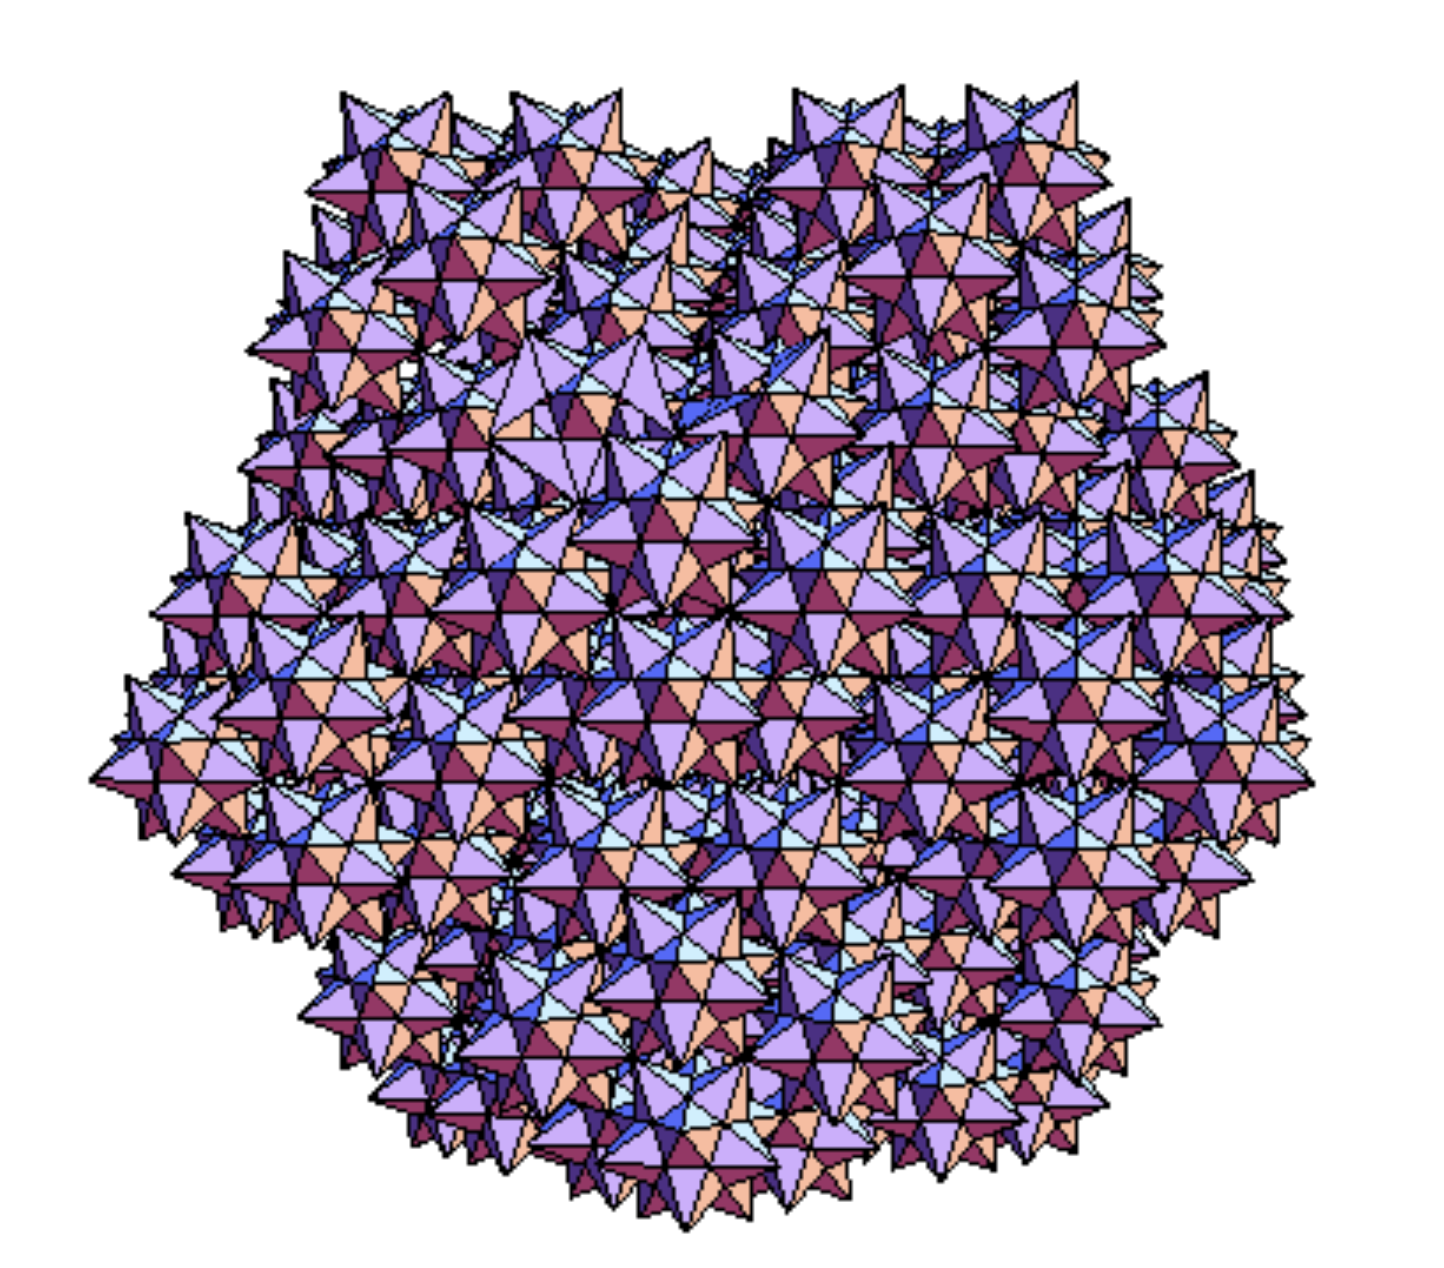 Math Monday: fractal polyhedra cluster (small-stellated dodecahedra)